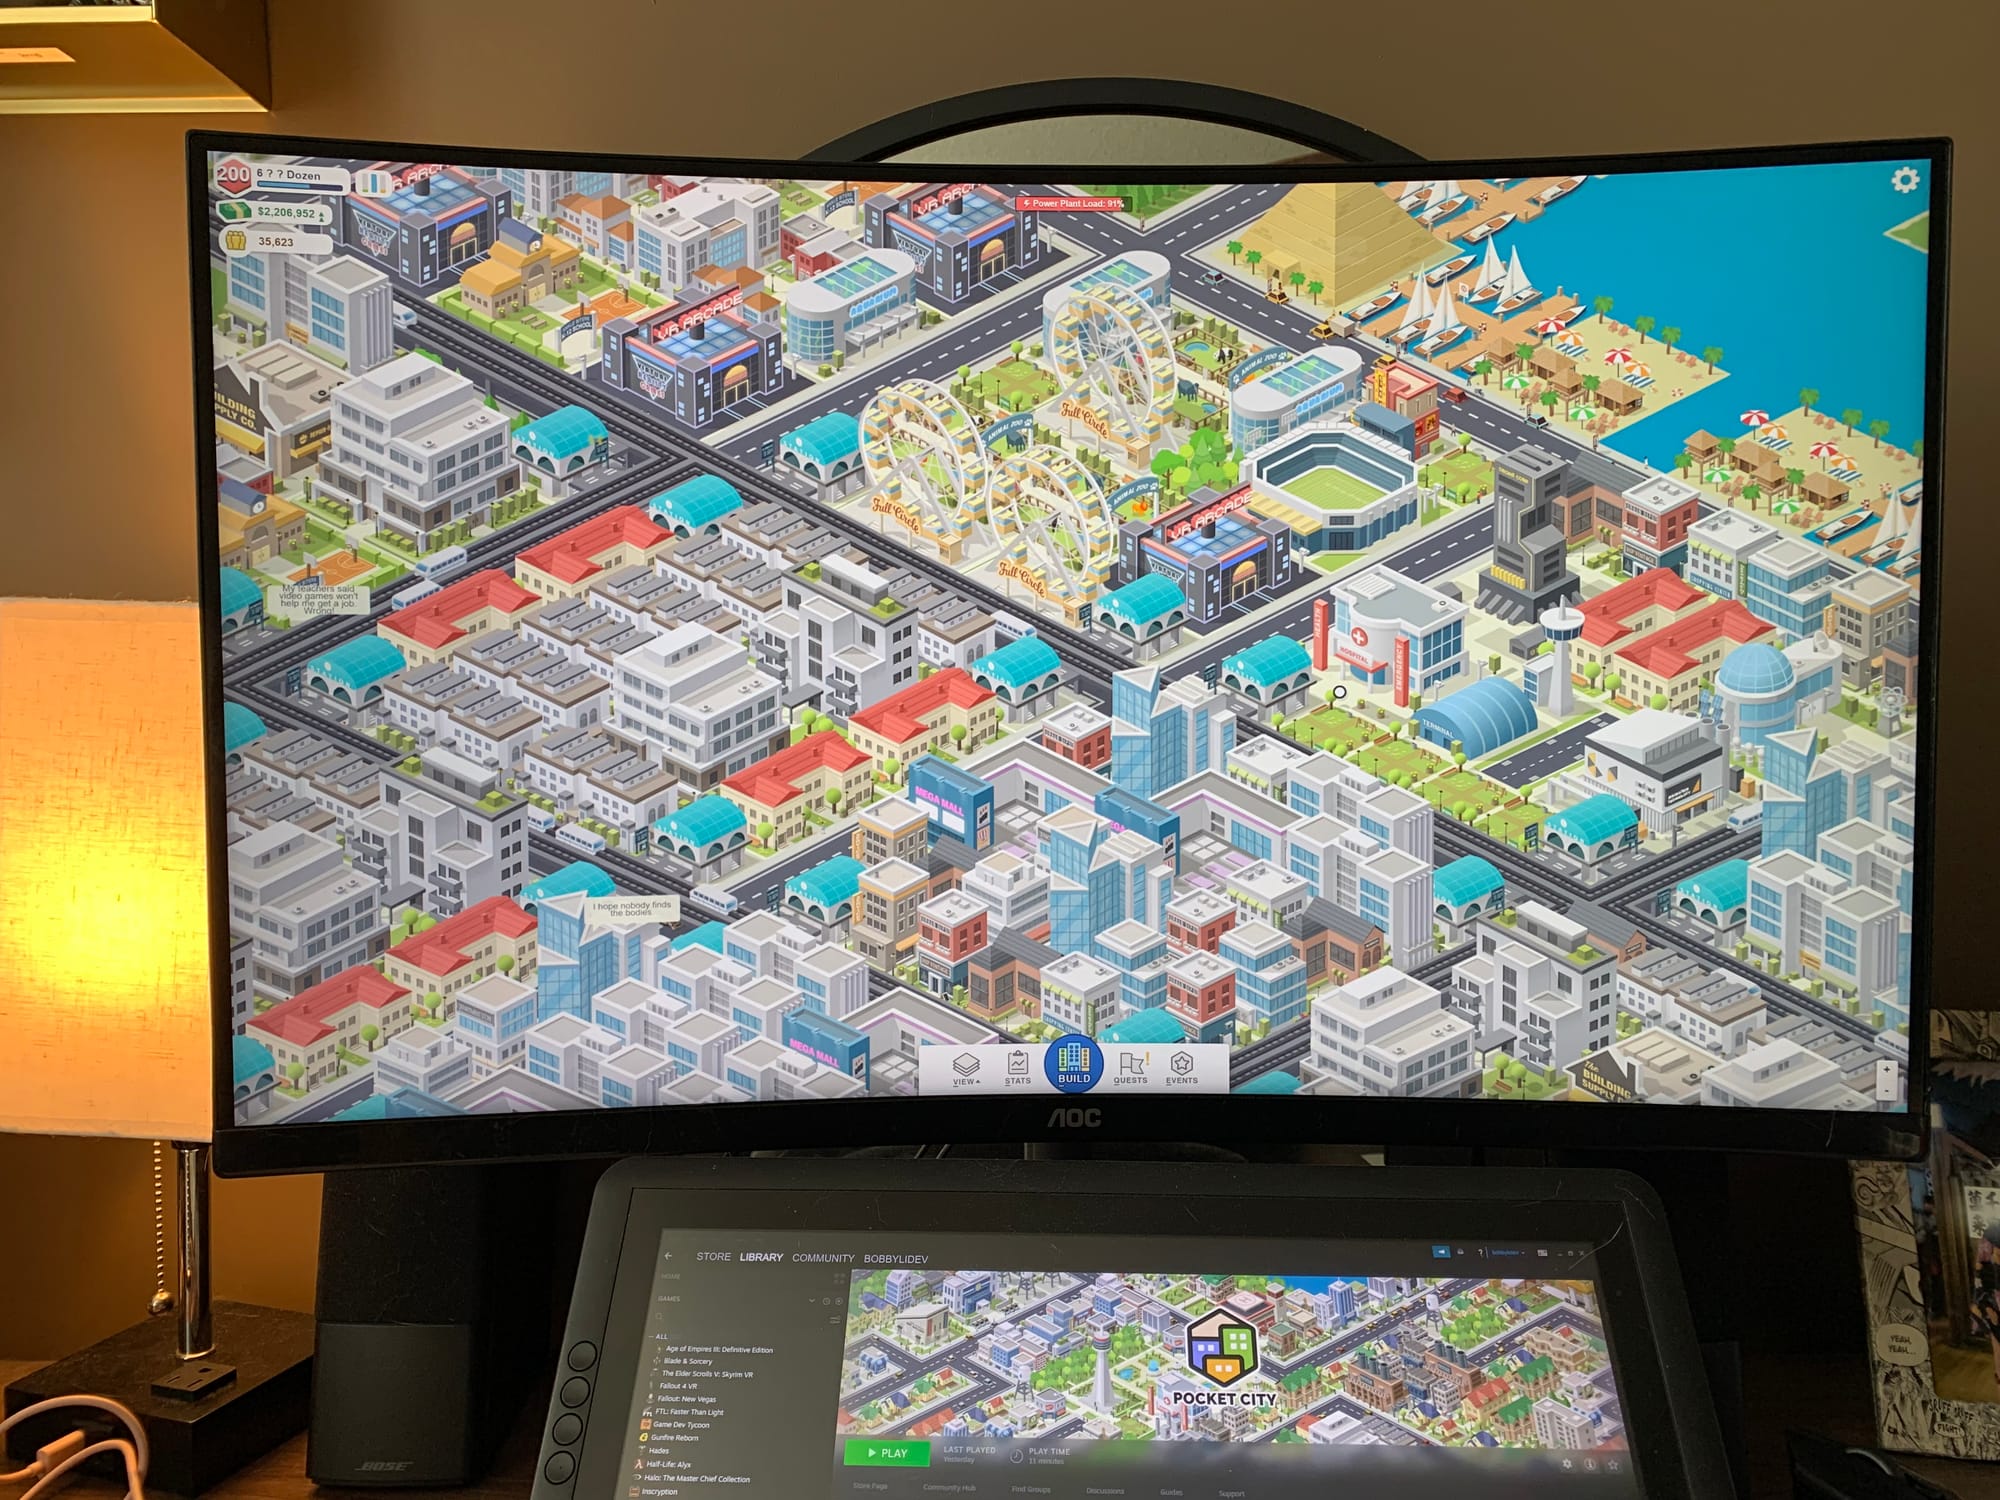 Pocket City is now available on Steam for PC and Mac!